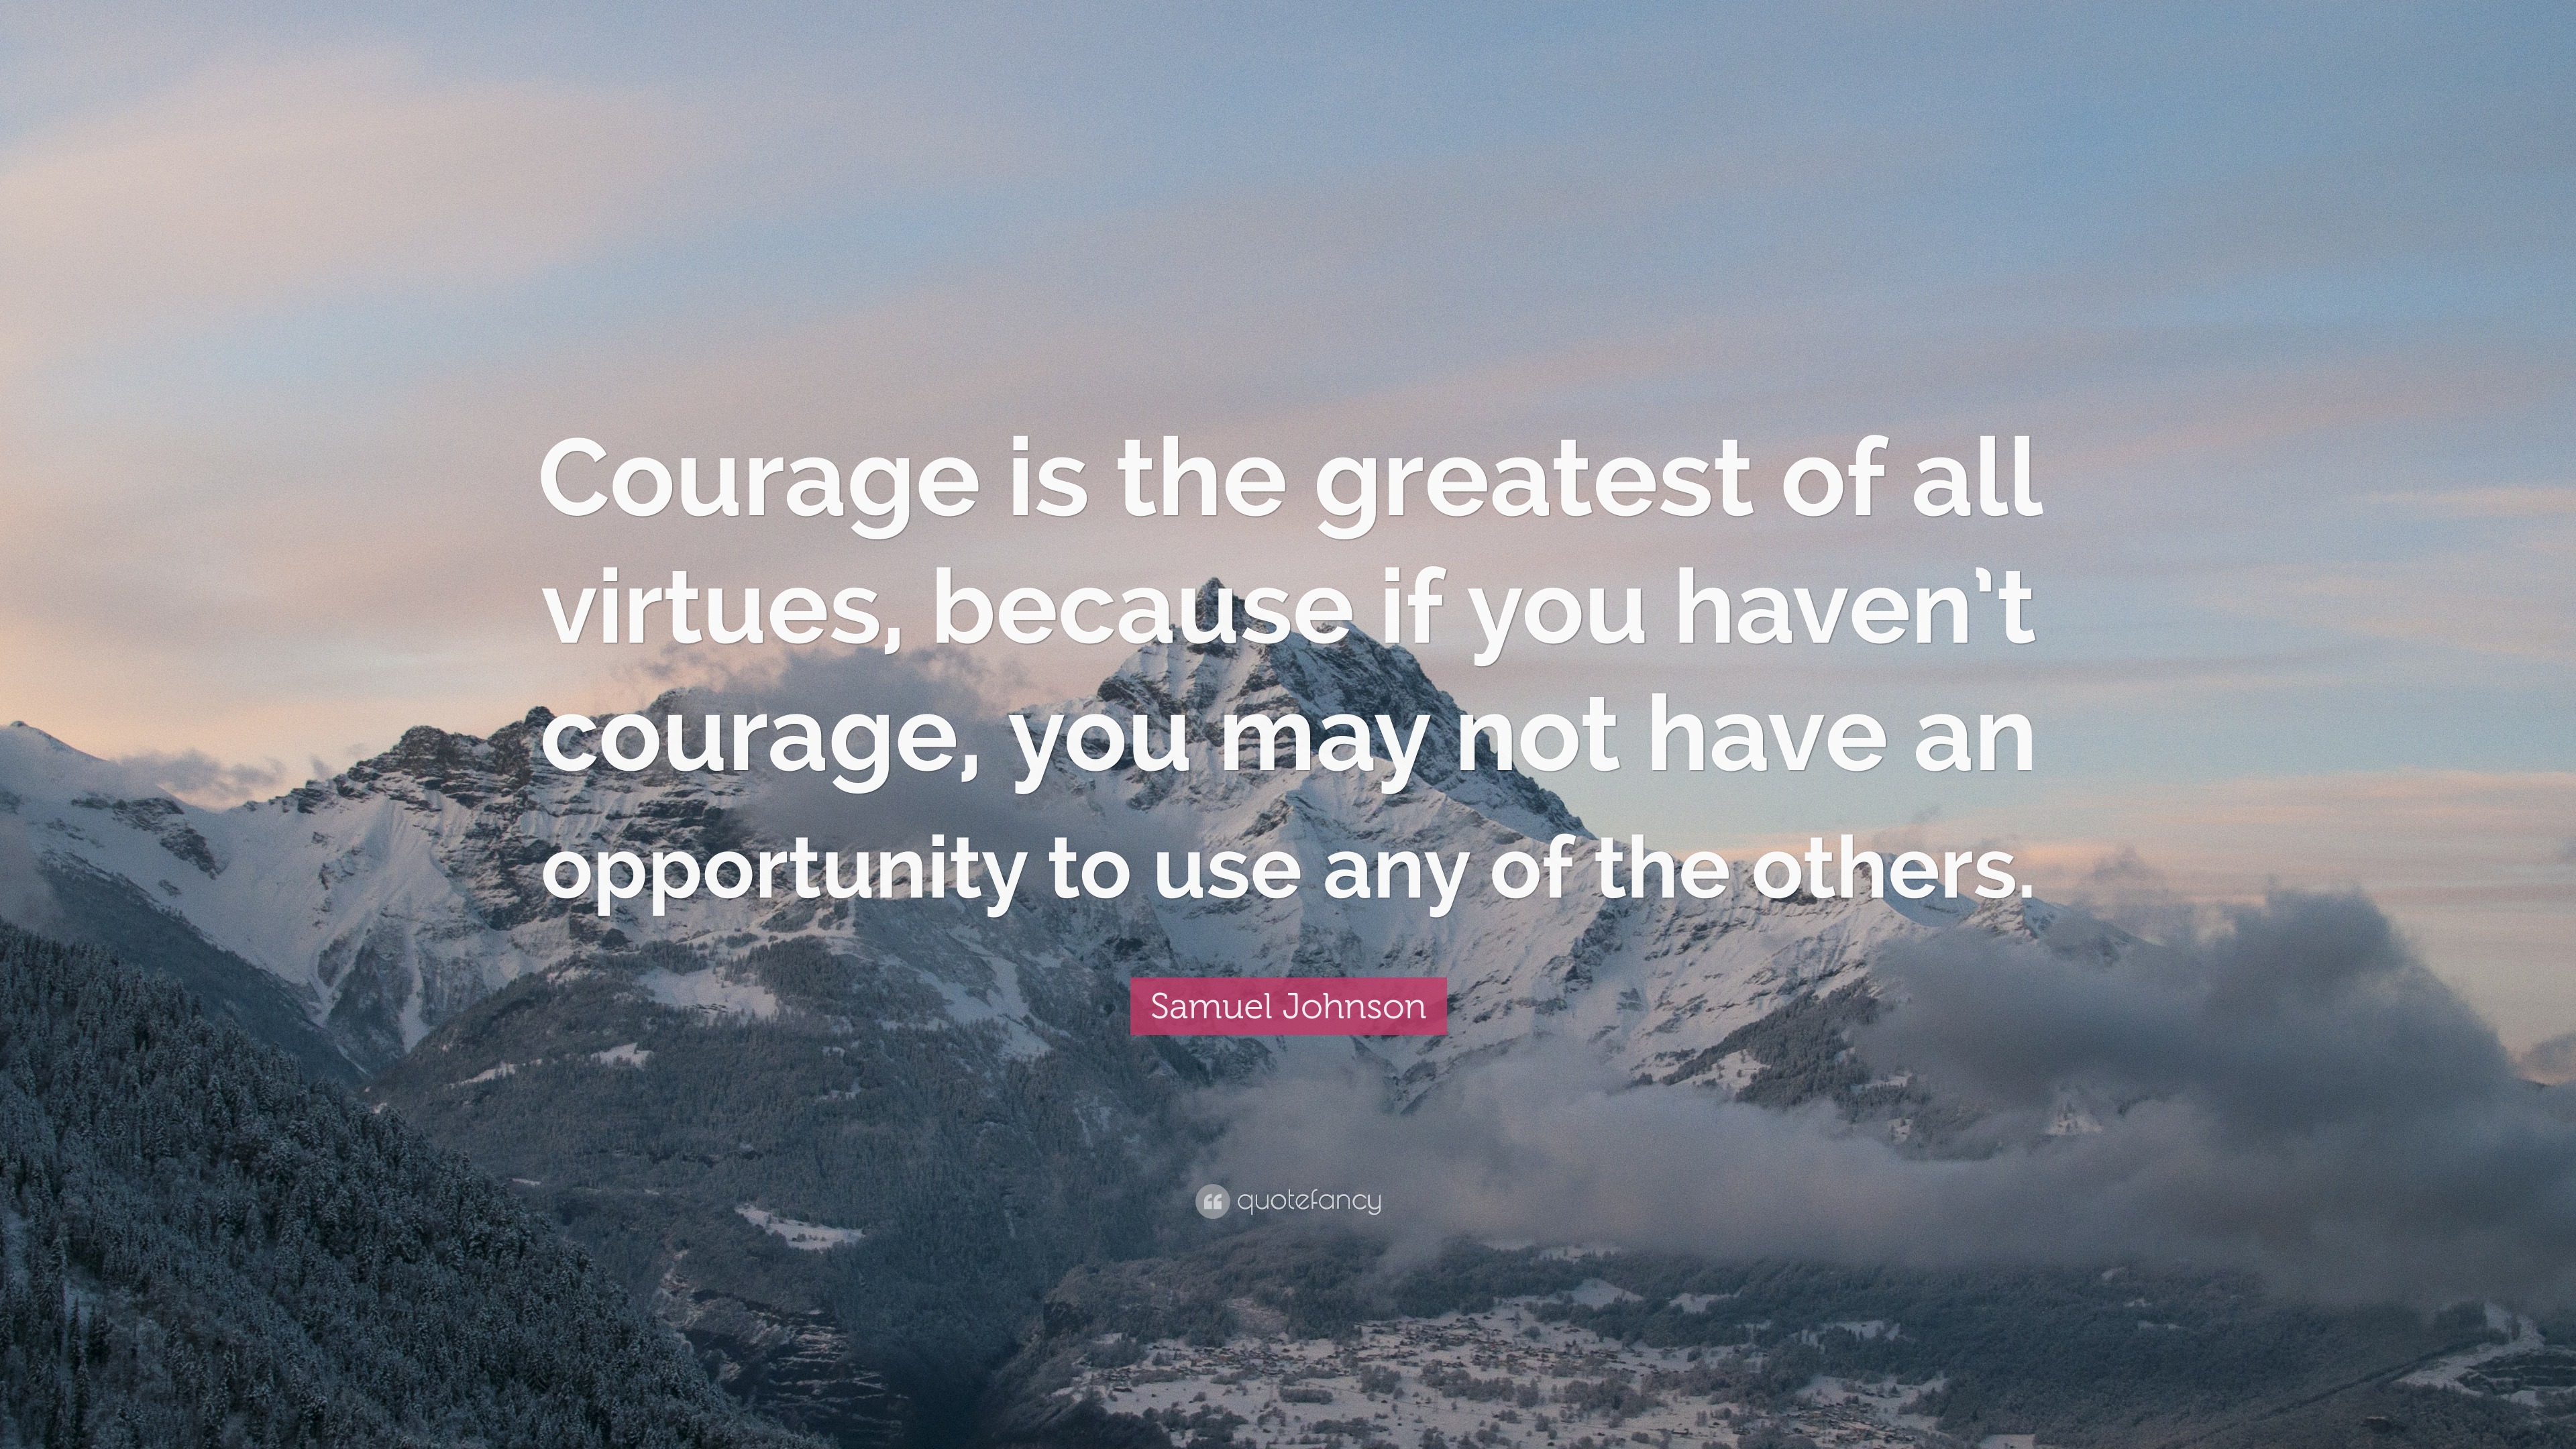 Samuel Johnson Quote: “Courage is the greatest of all virtues, because ...